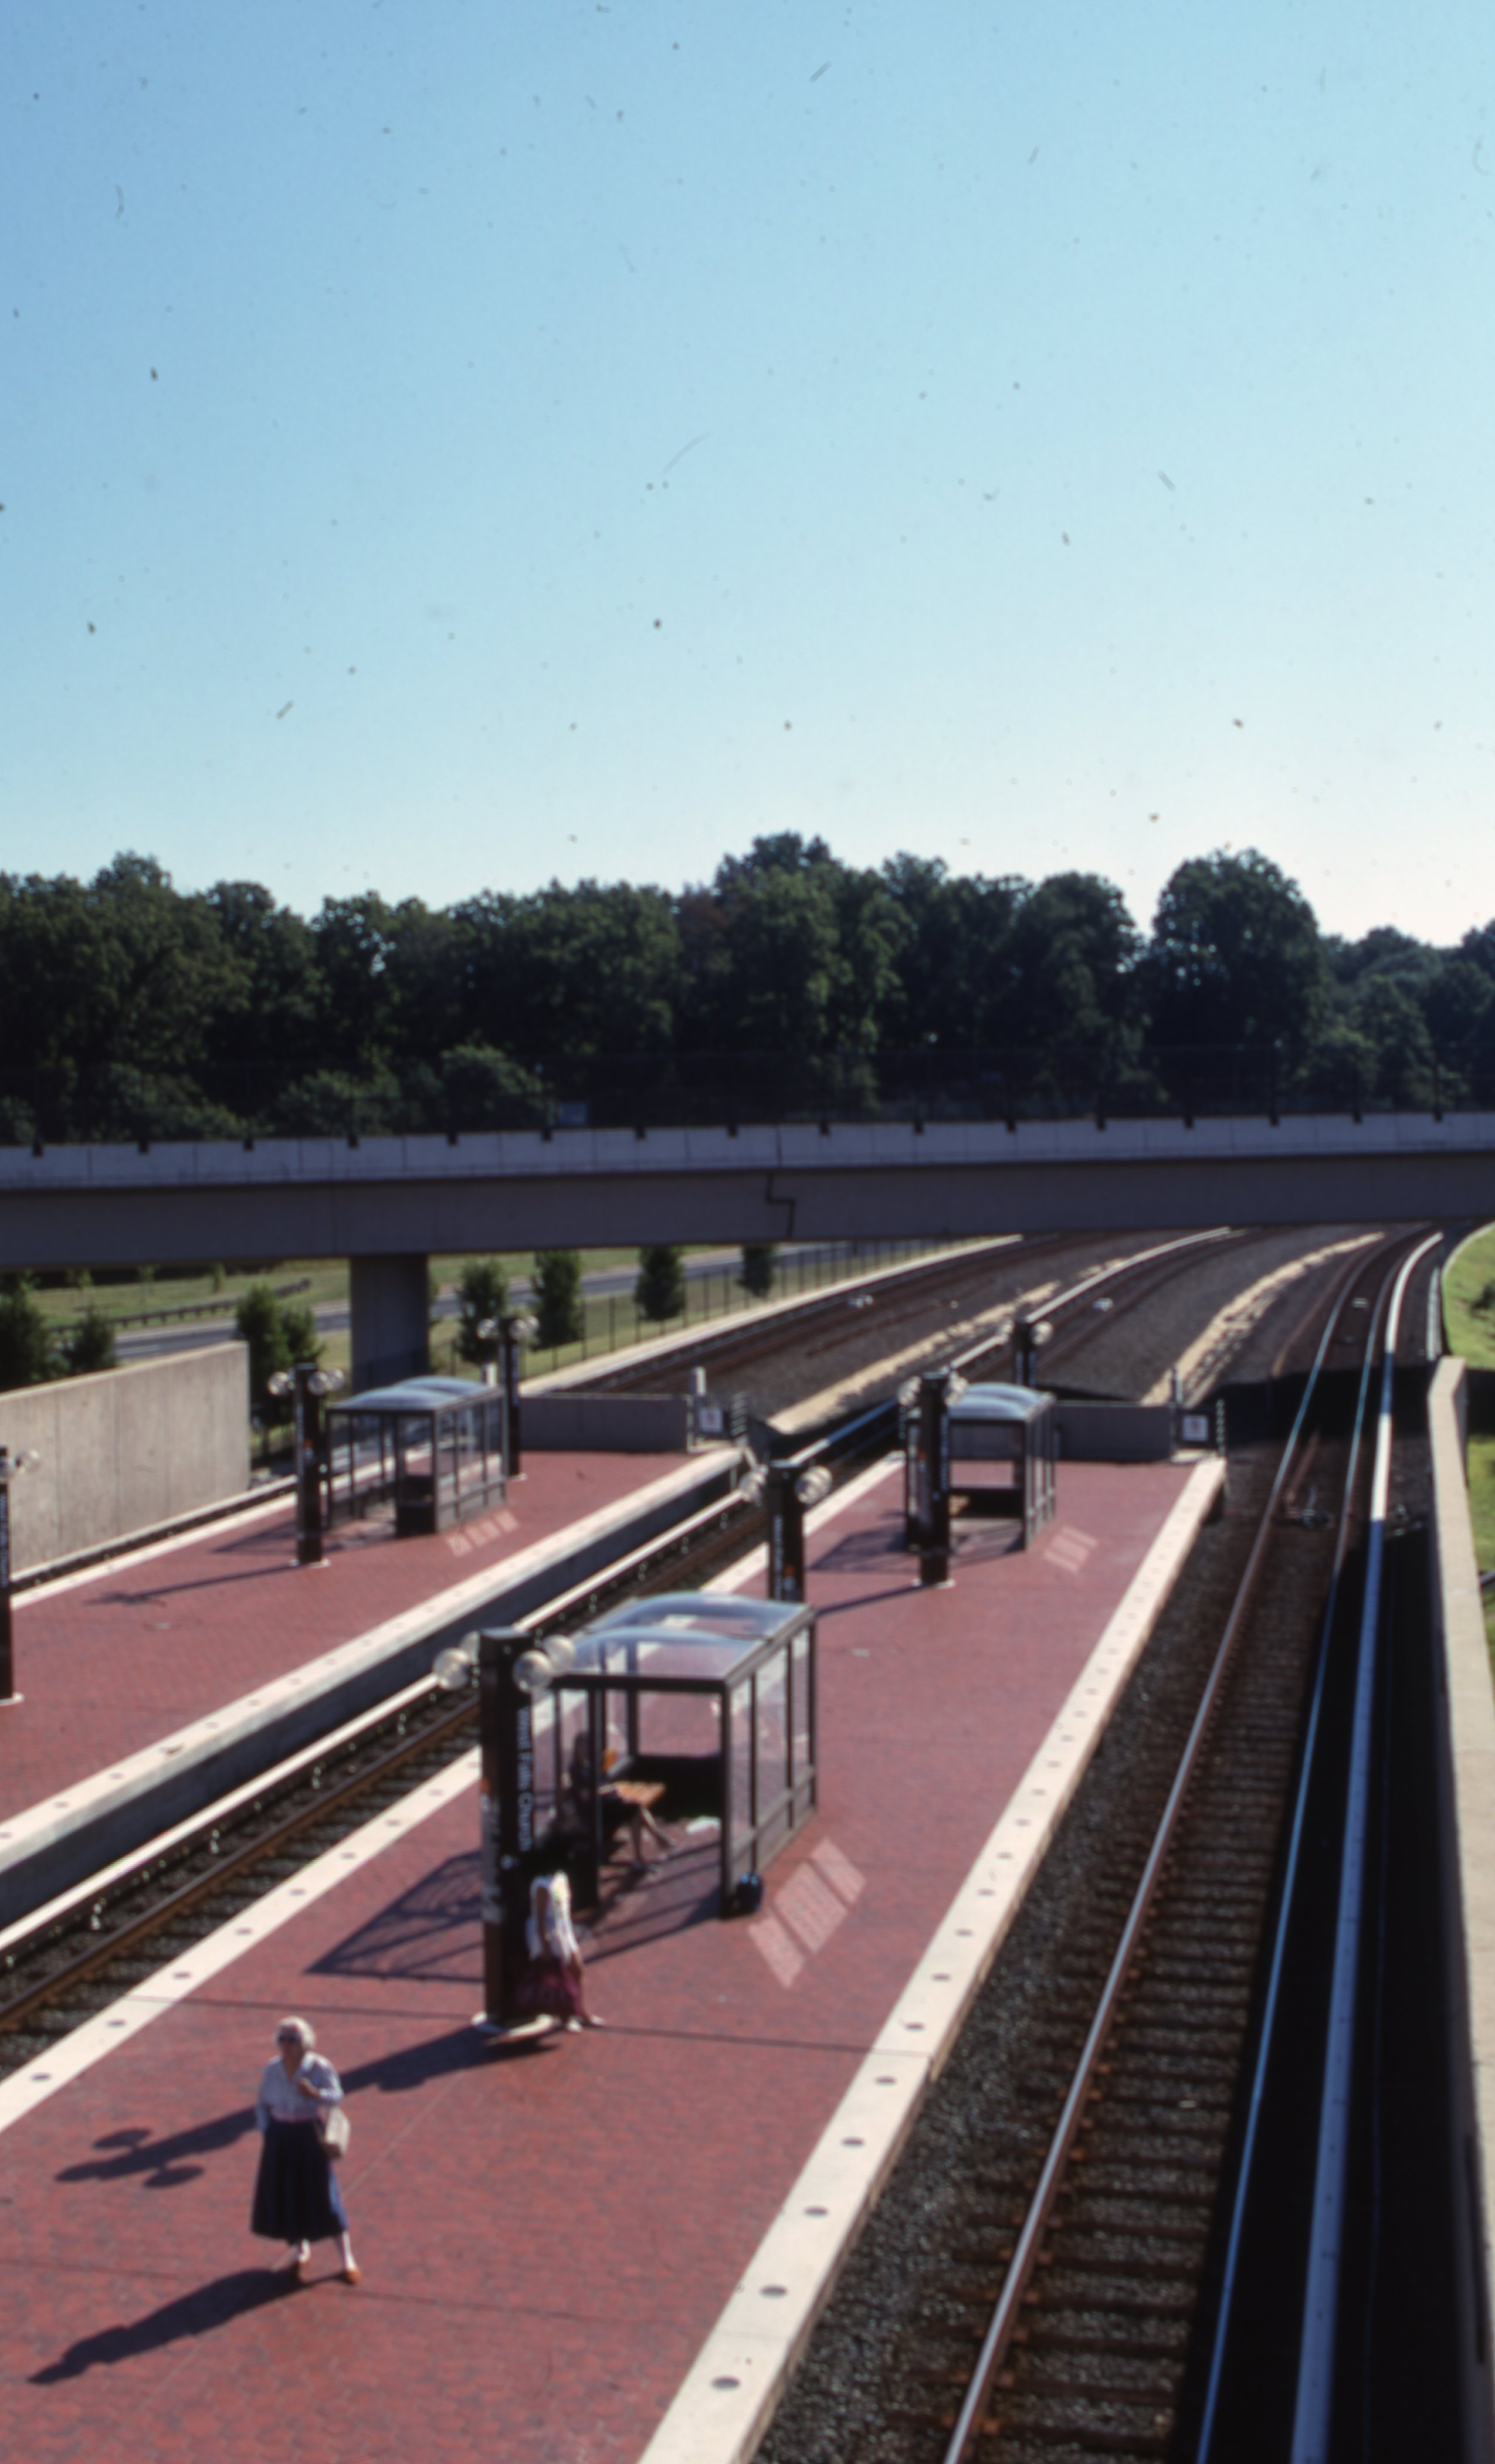 West Falls Church Station - August 1989